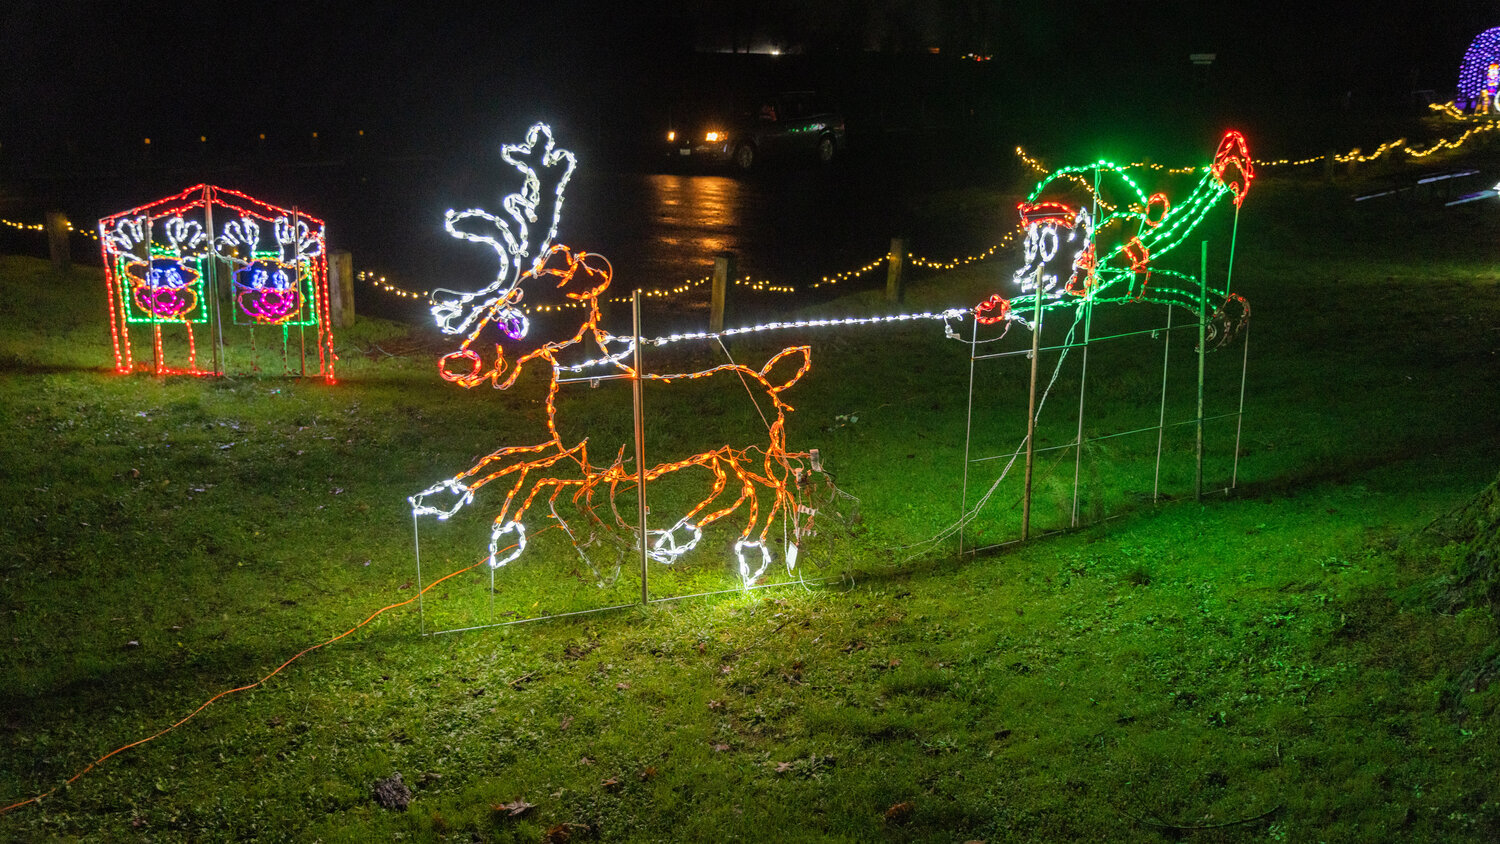 Flashing lights animate characters in Borst Park for a drive through sight seeing display in Centralia on Thursday, Dec. 7.